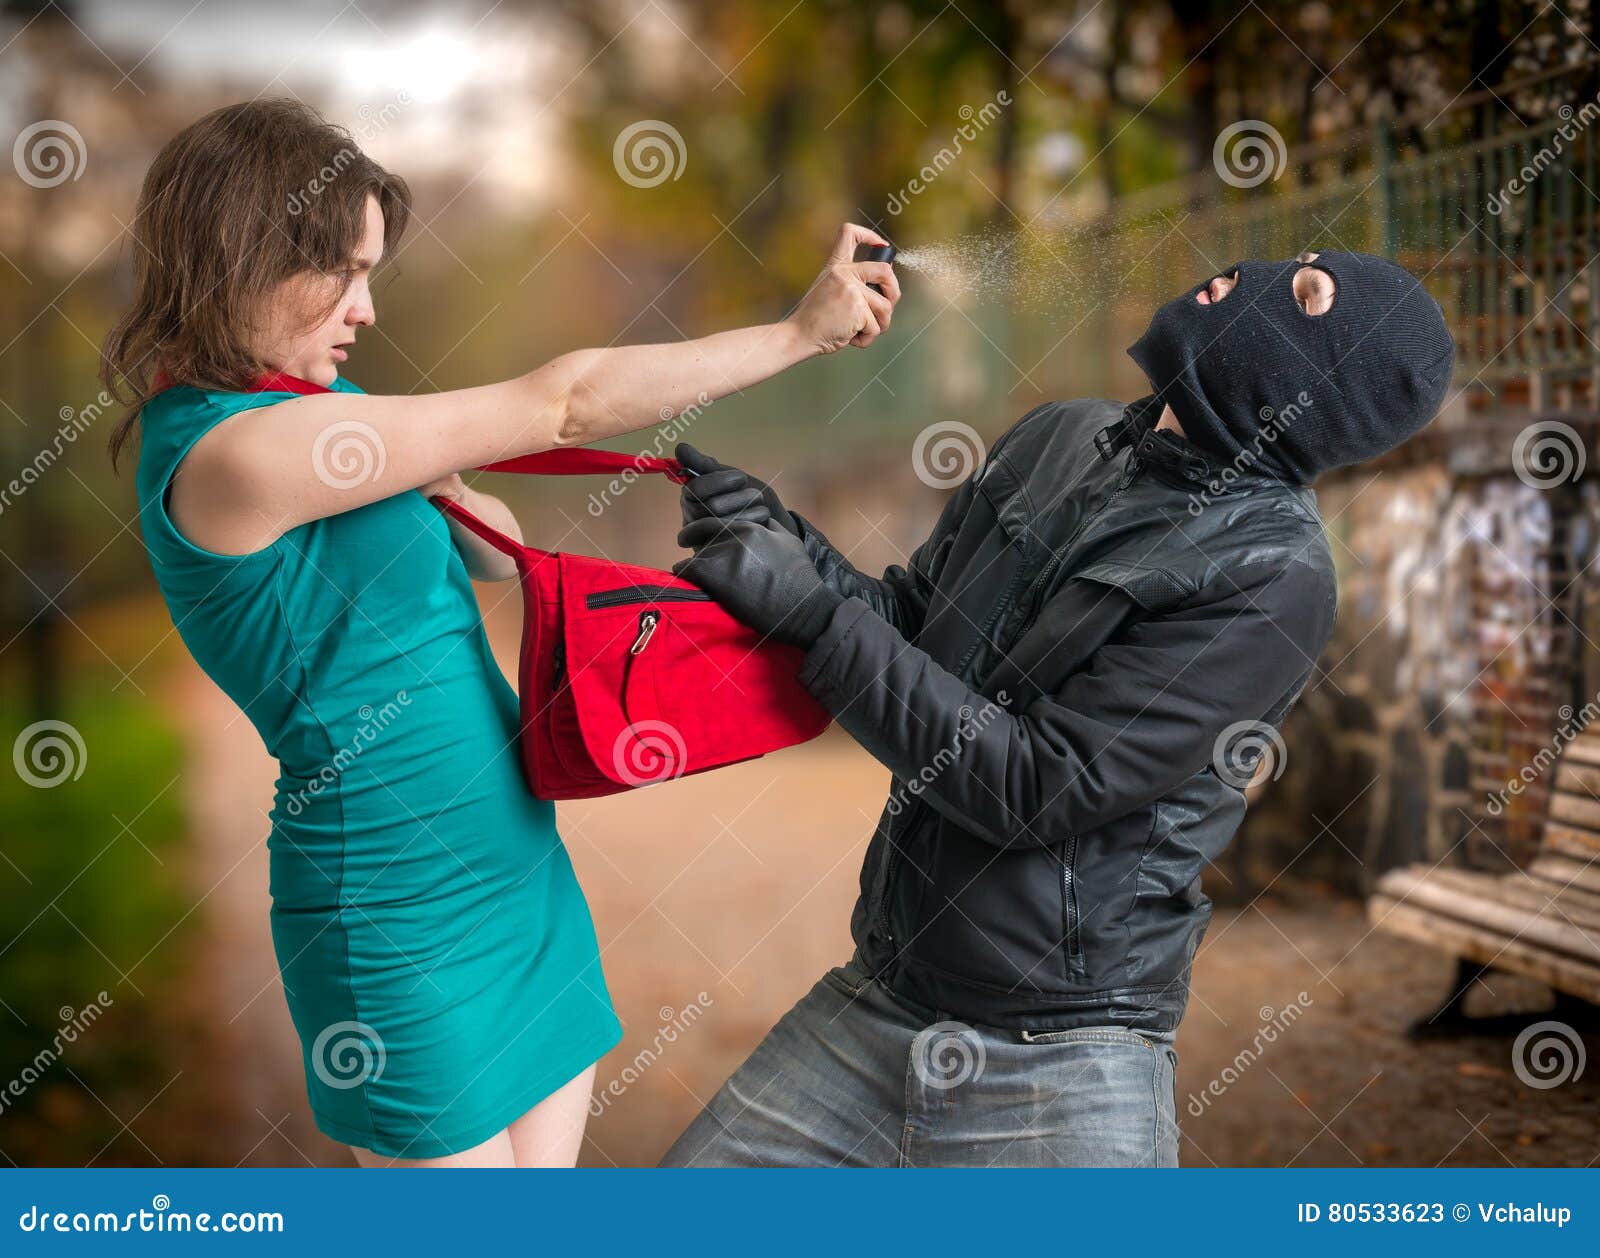 self defense concept. young woman was attacked by man in balaclava is using pepper spray